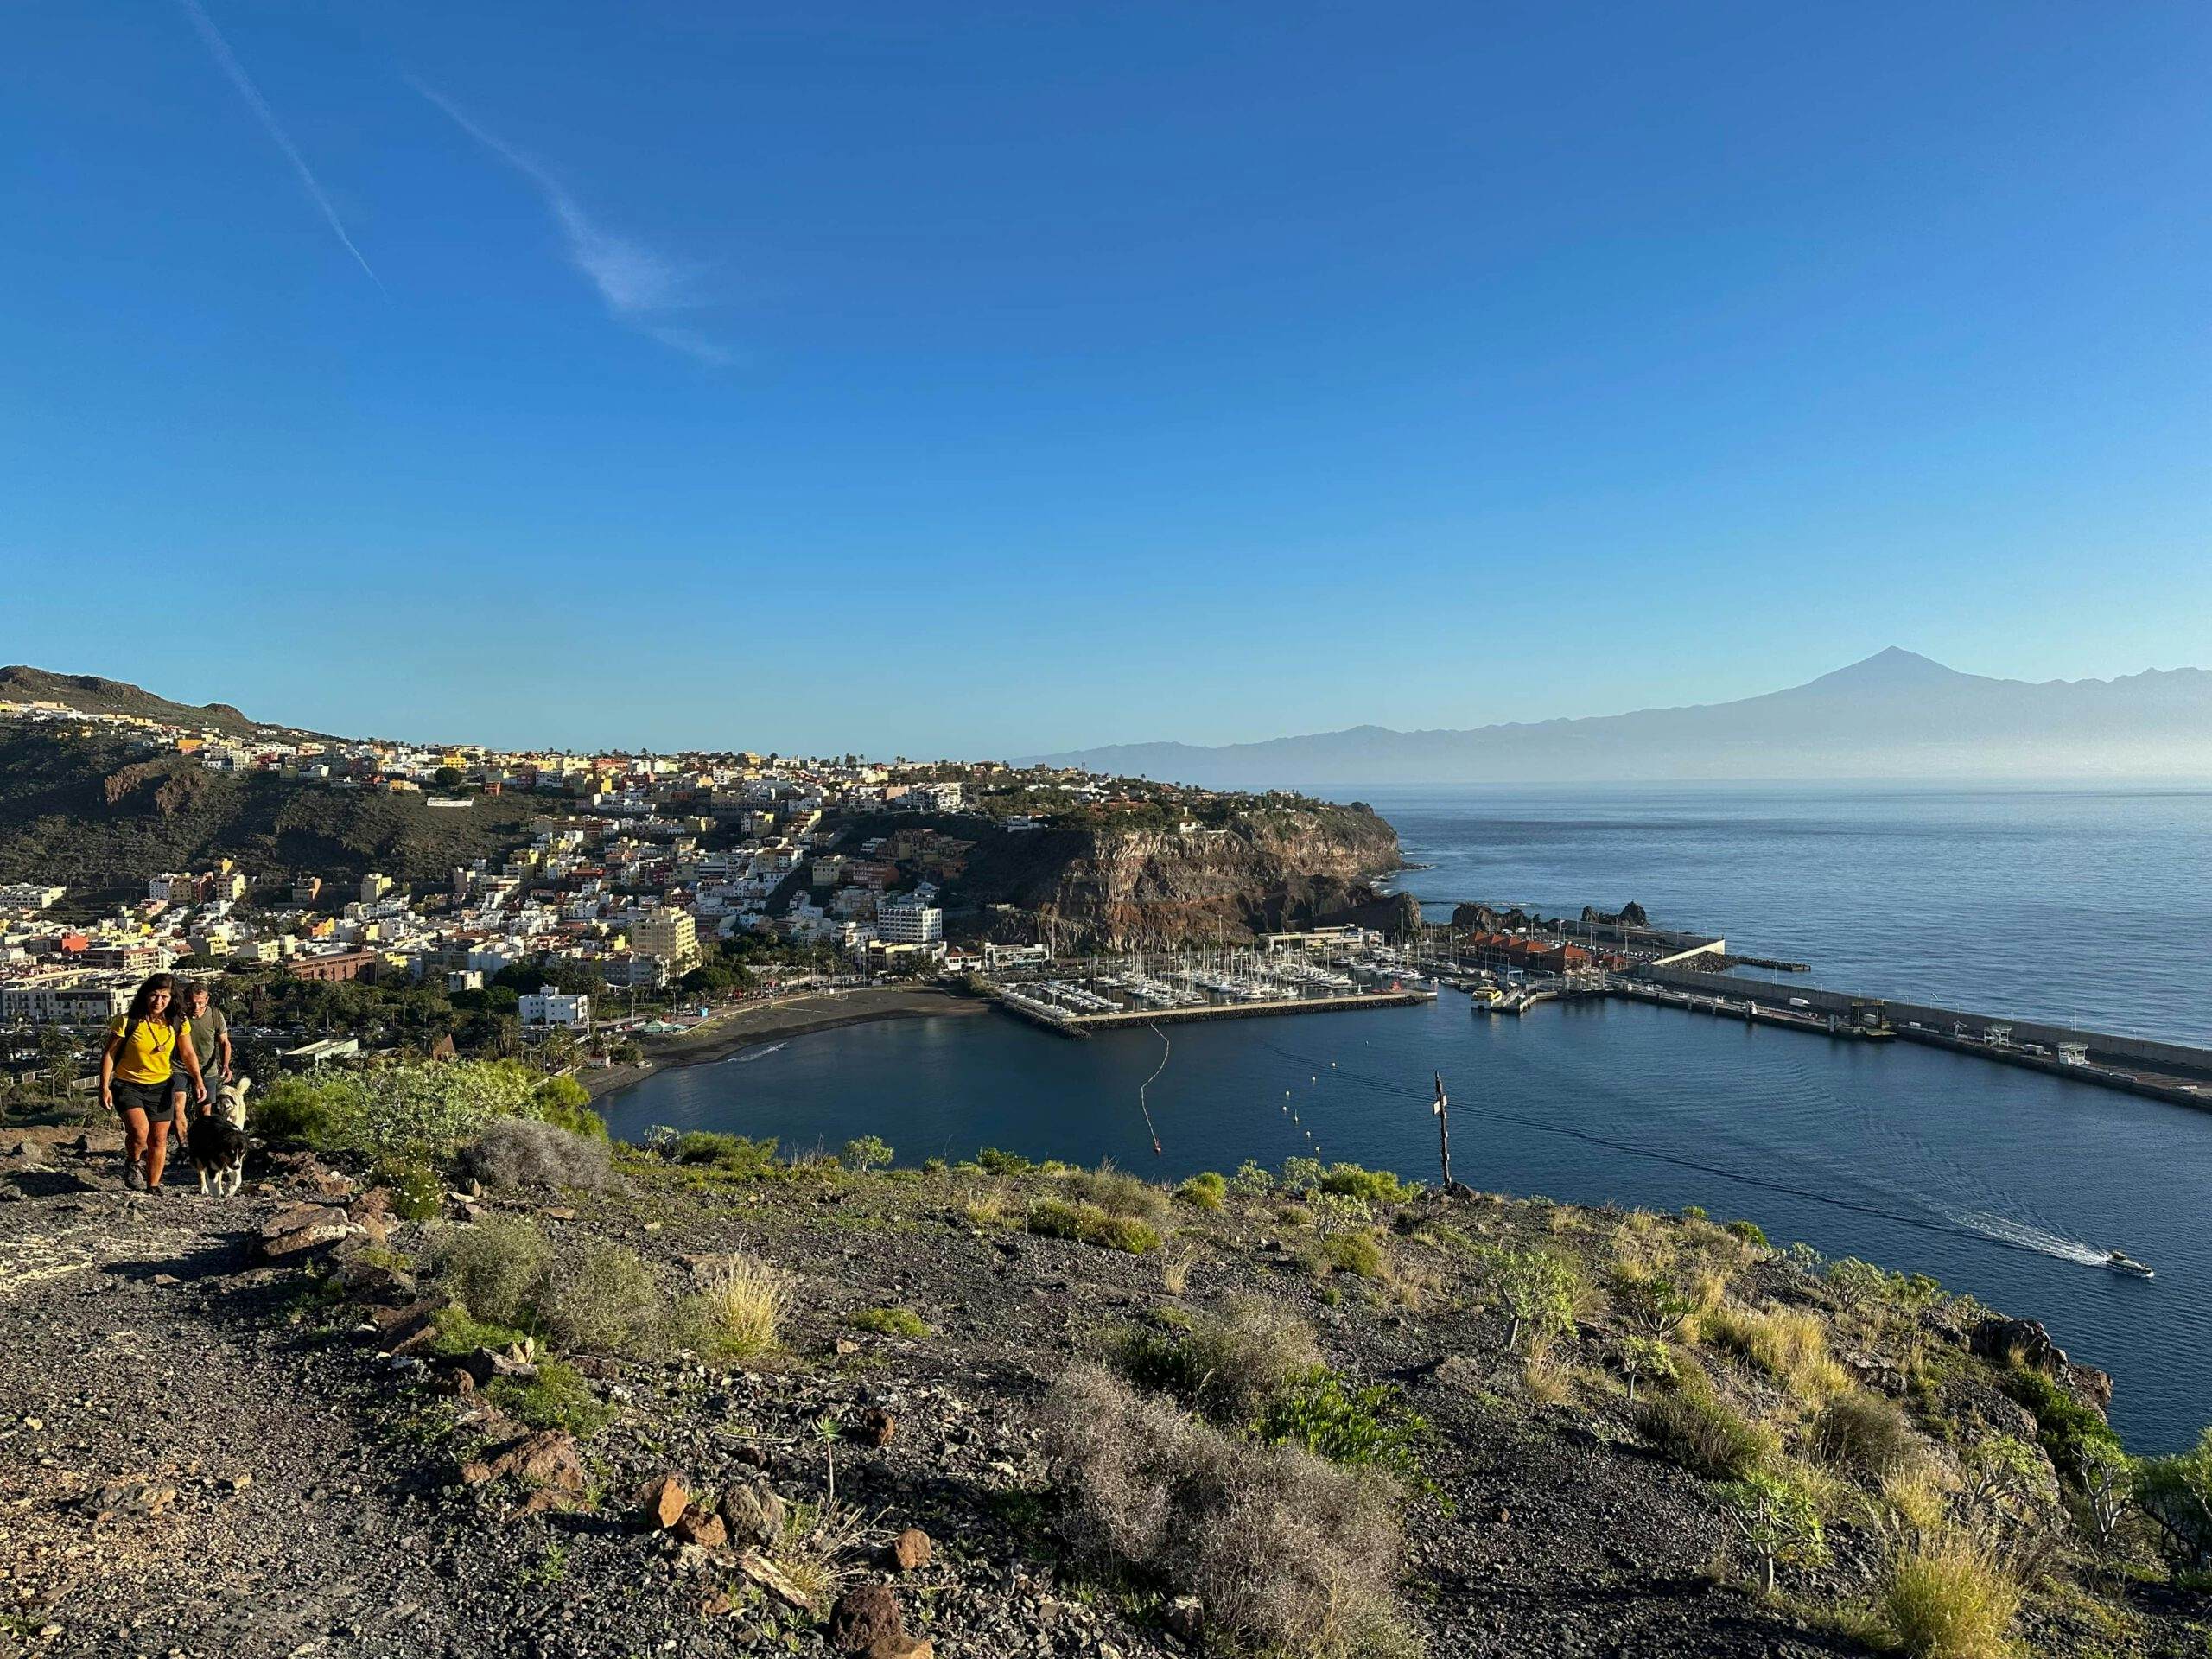 View back from the hiking trail to San Sebastián and Tenerife with the Teide